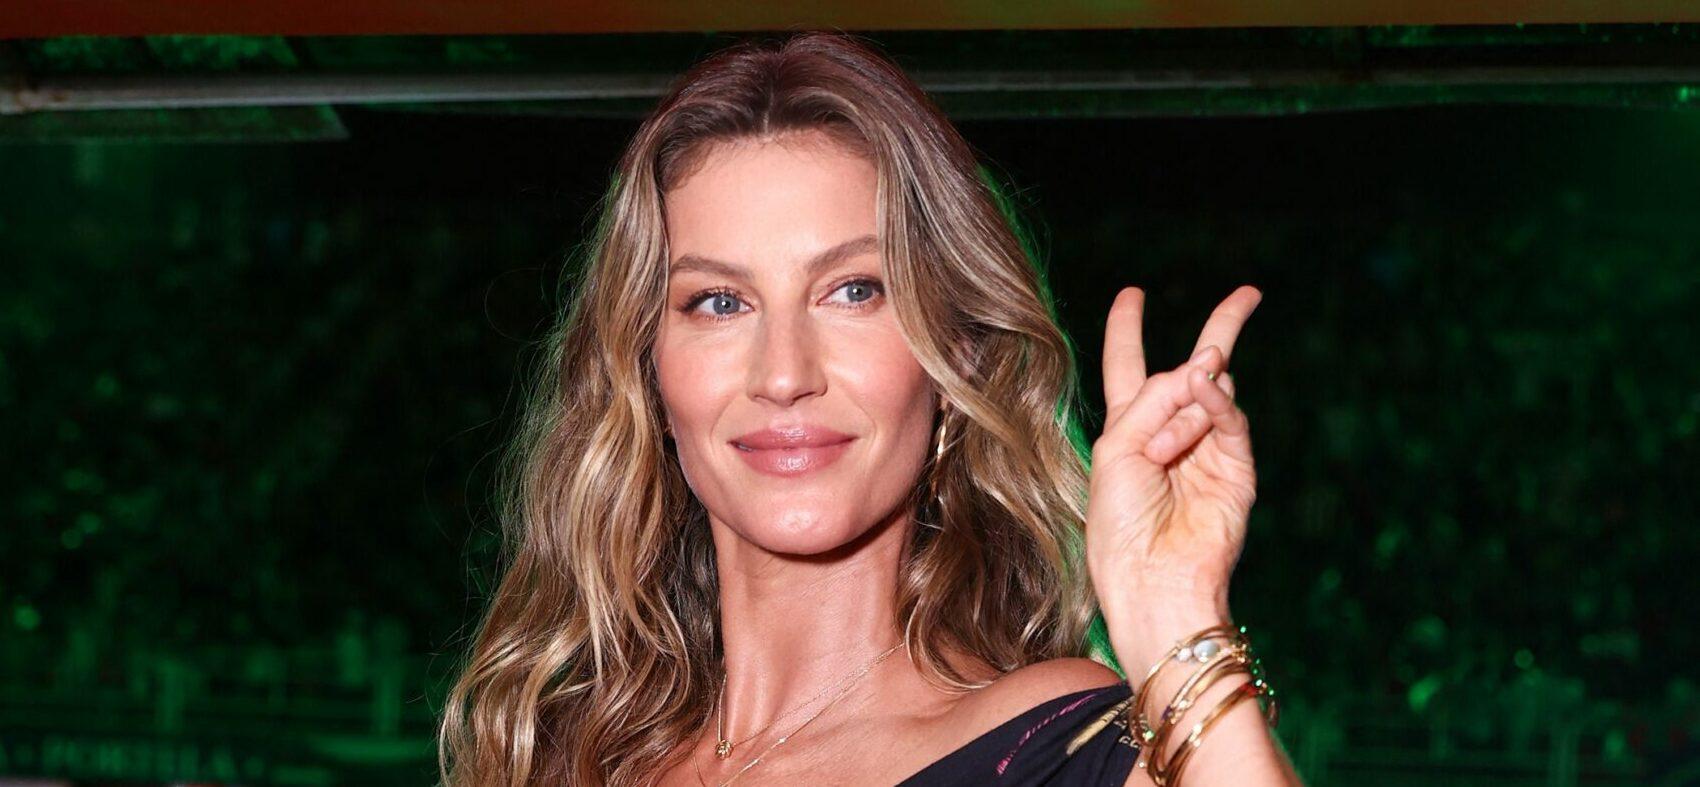 Gisele Bündchen Lives It Up At Rio De Janeiro Carnival While Flaunting Abs